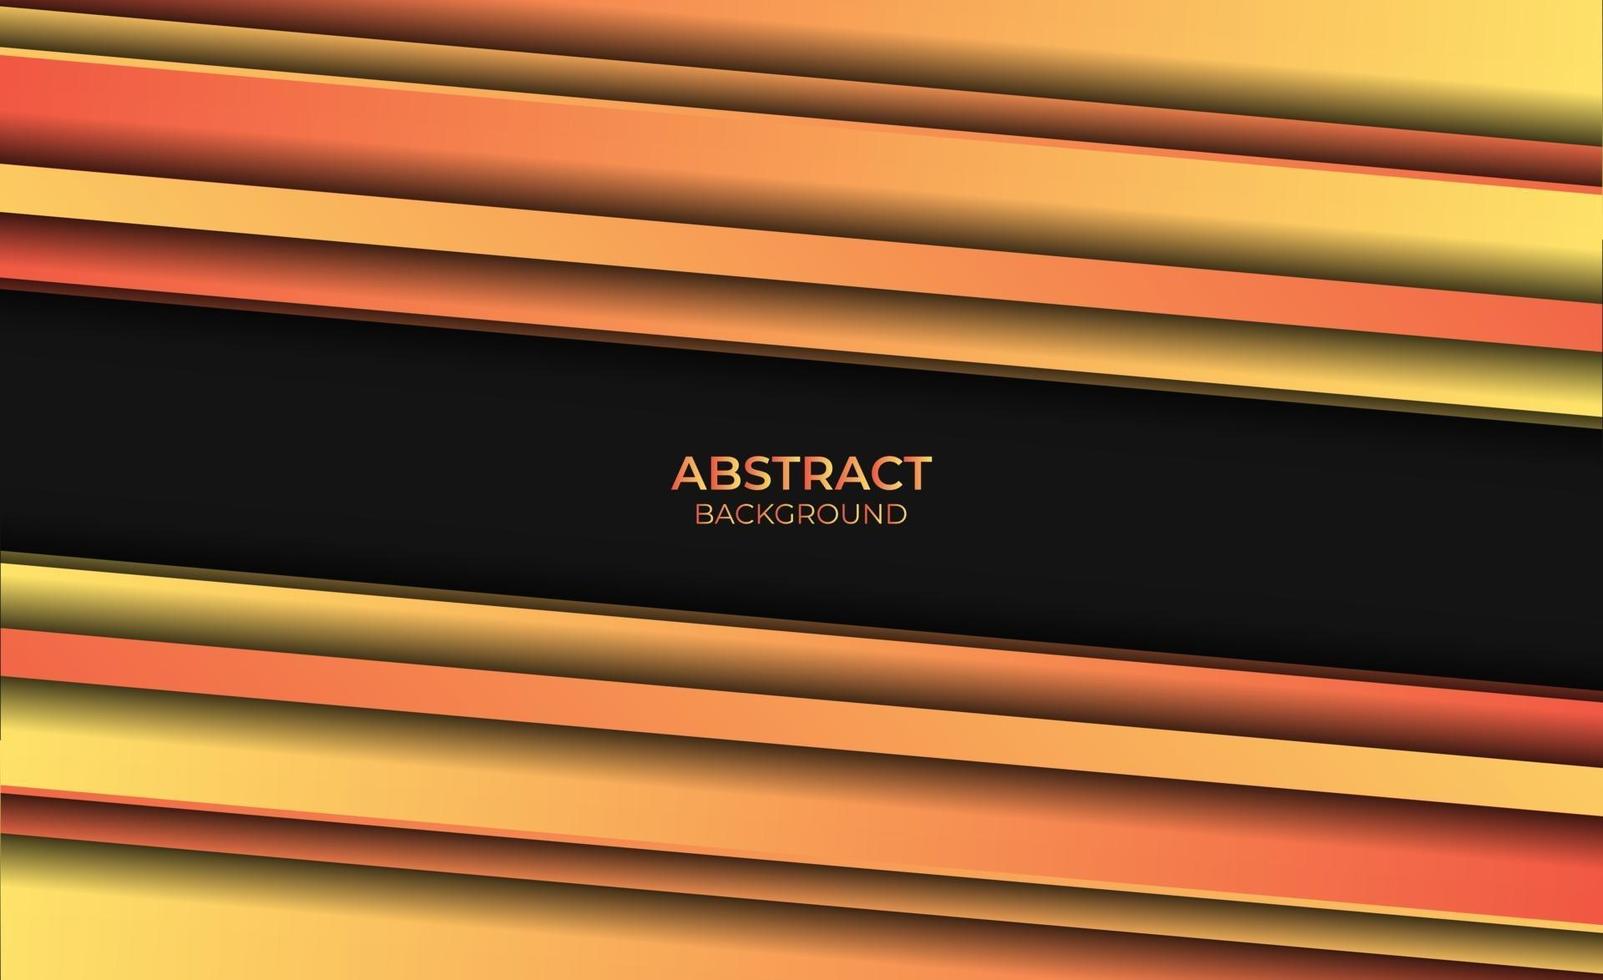 Design Abstract Gradient Fire Style Background vector